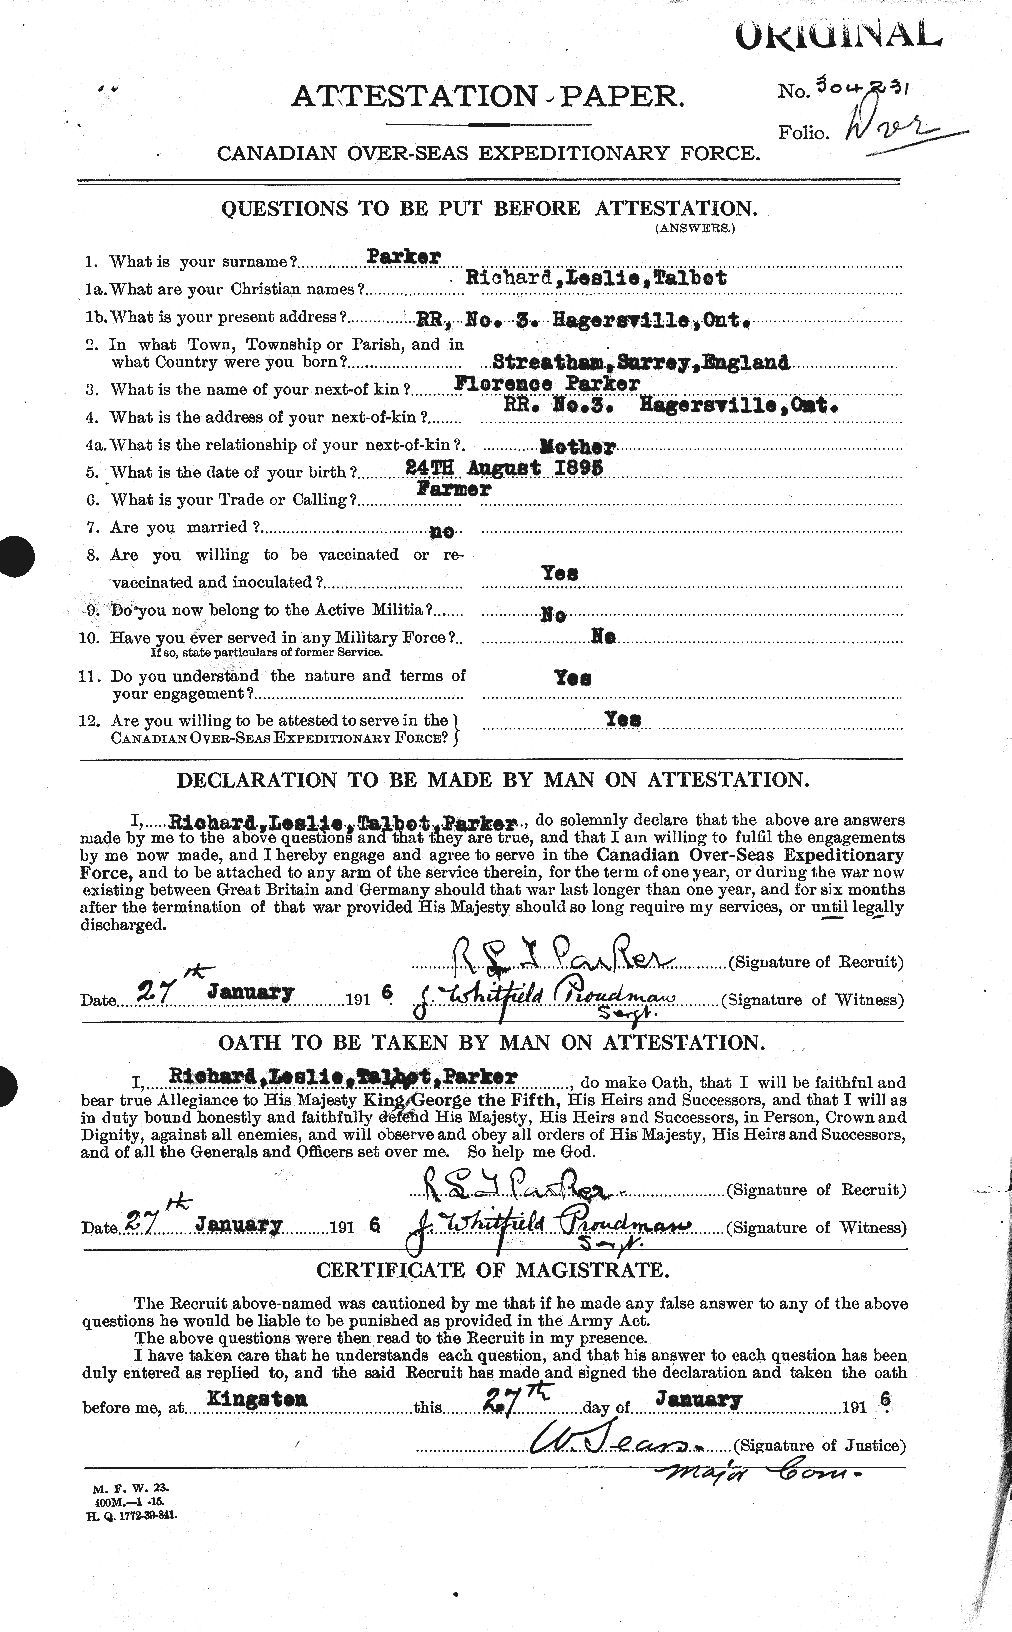 Personnel Records of the First World War - CEF 565588a